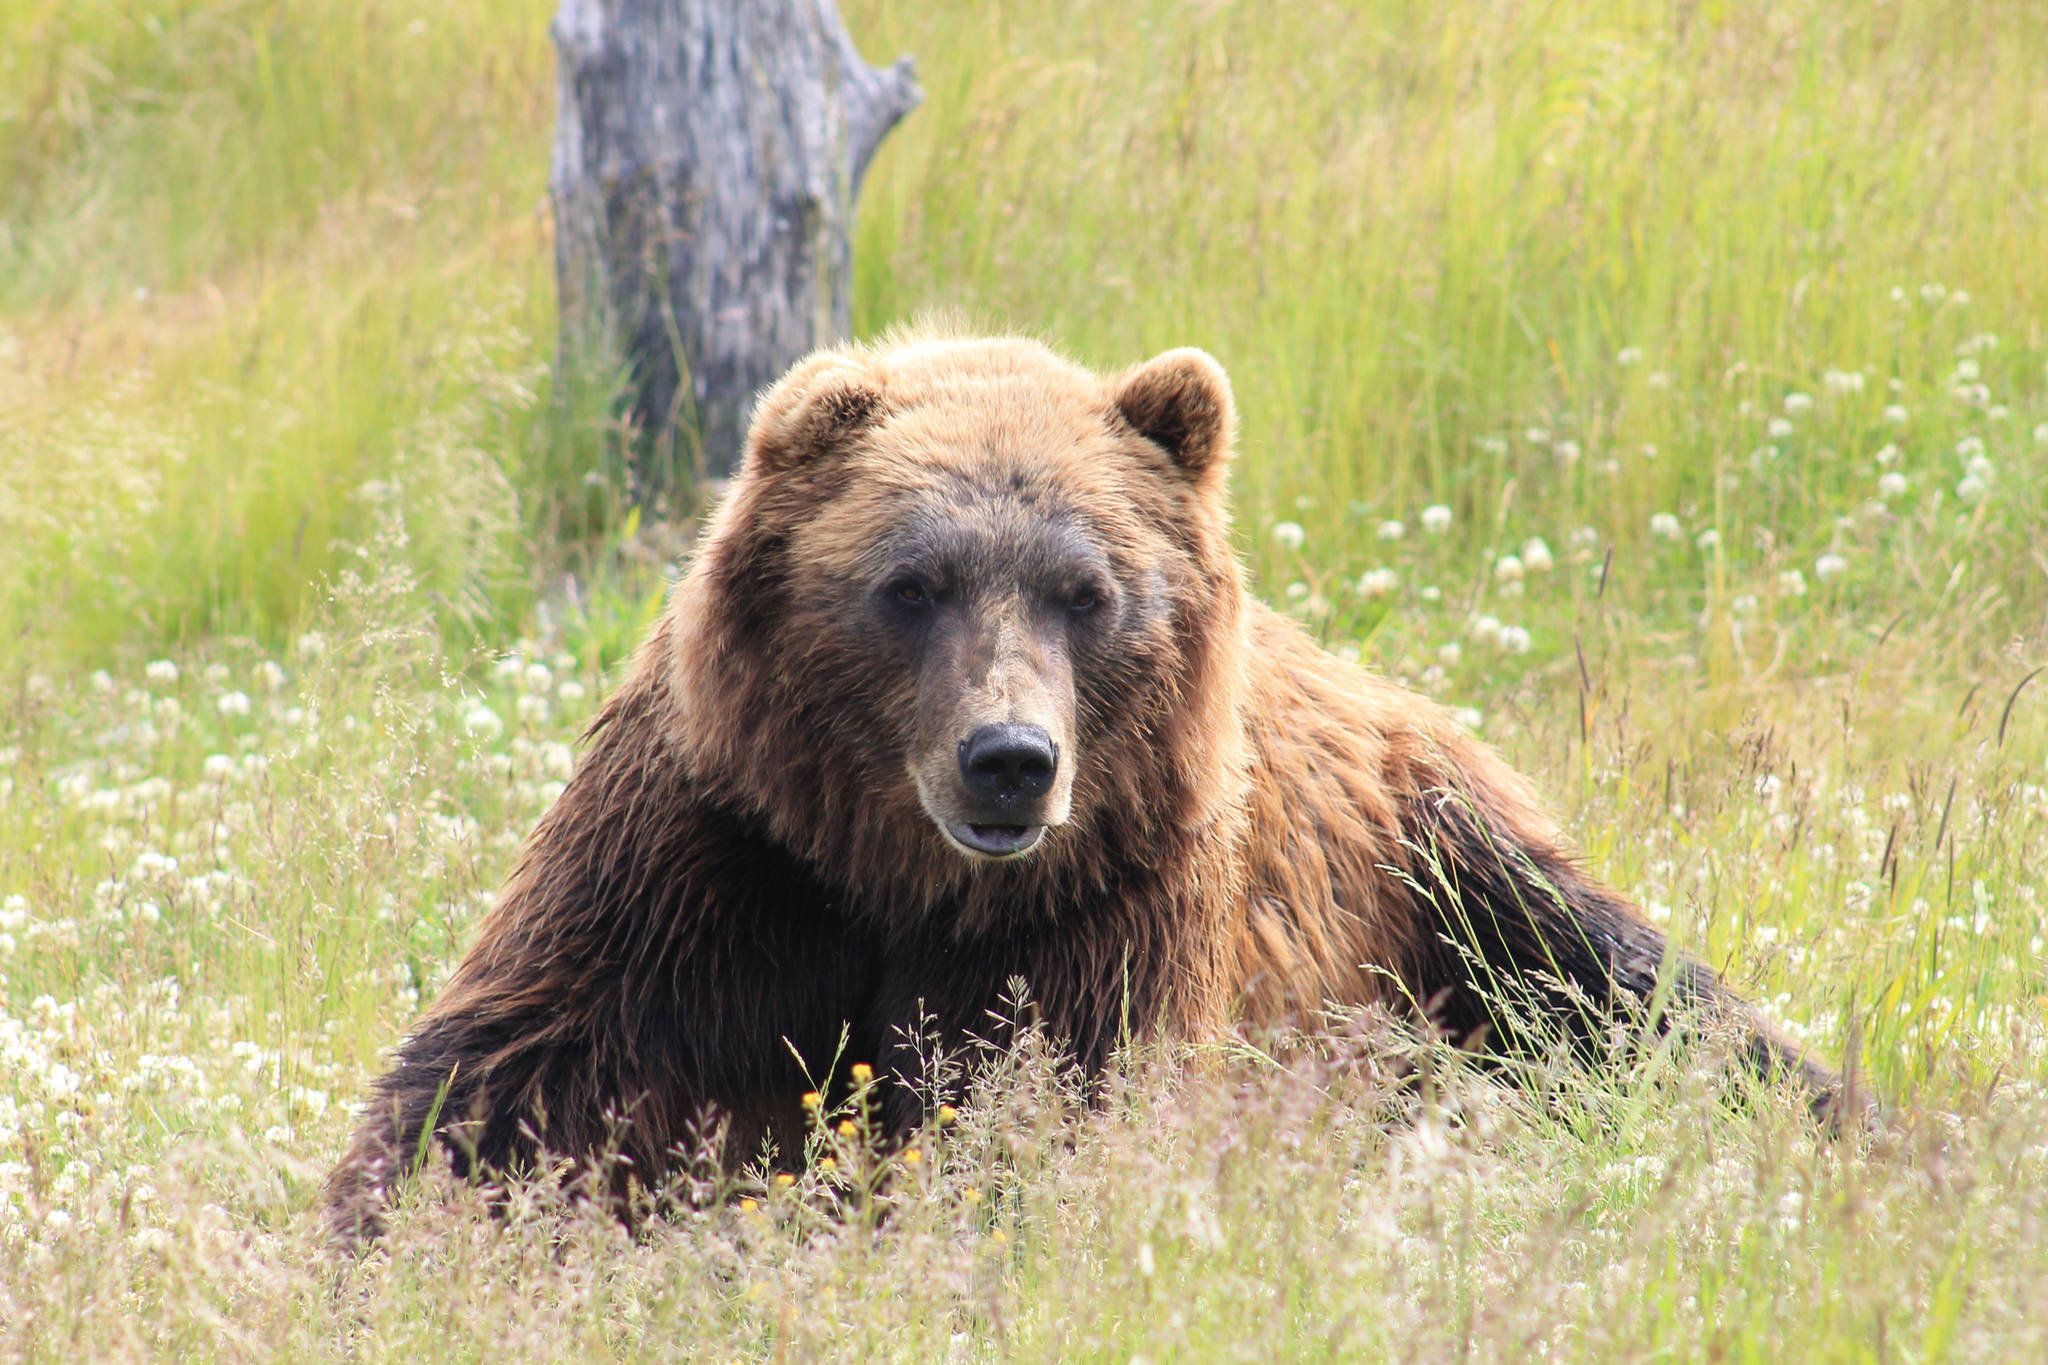 A brown bear in Alaska. This is not the bear involved in the encounter described in this article. (Unsplash)